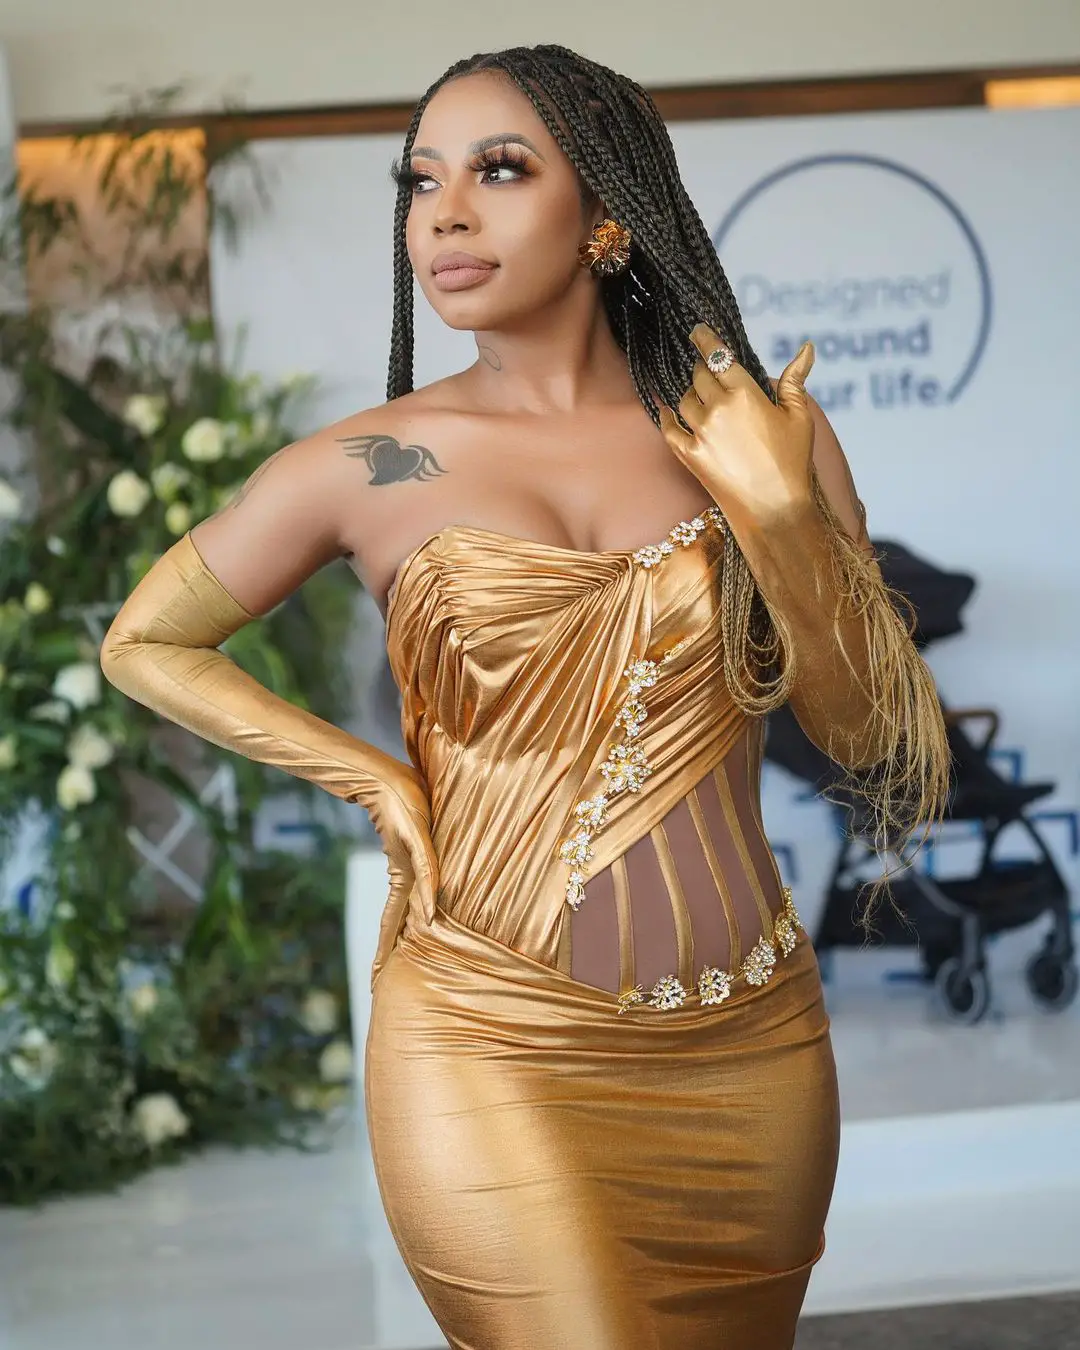 Kelly Khumalo has been removed from another show line-up